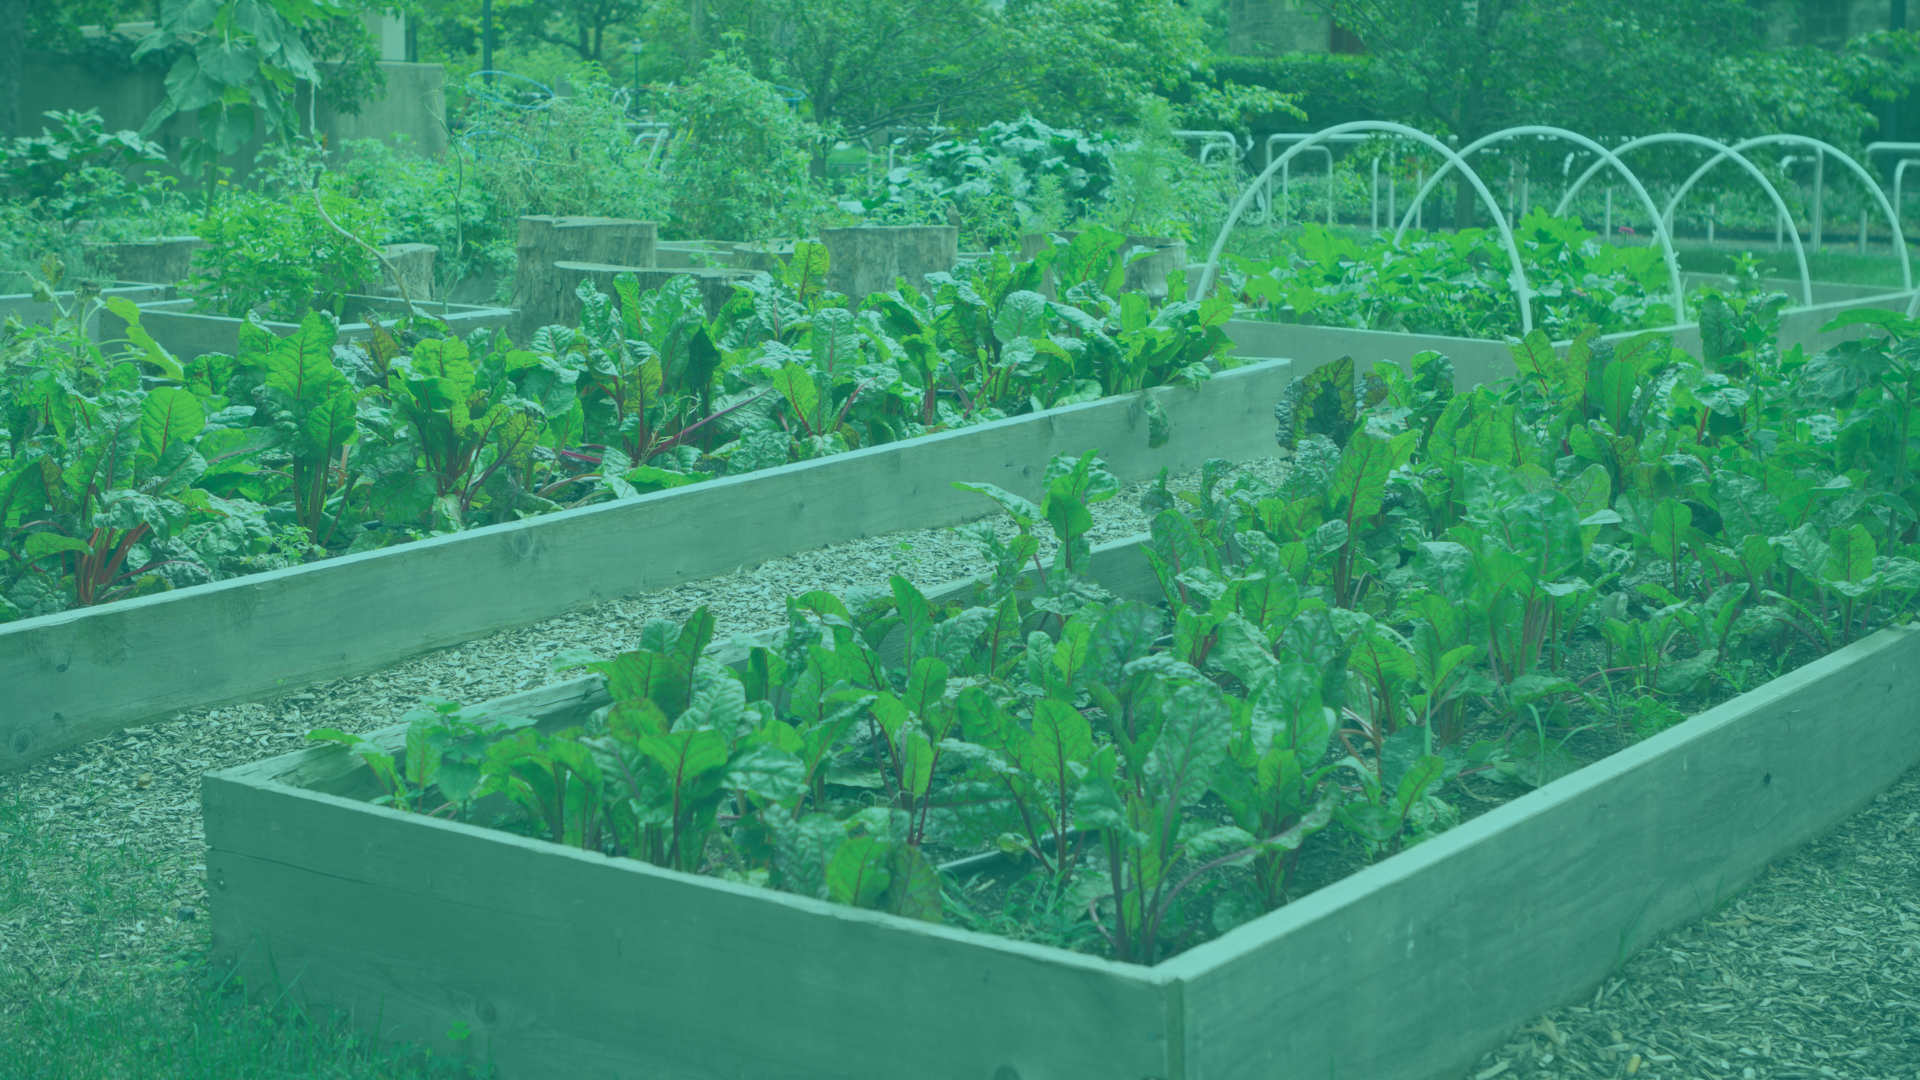 Image of a community garden